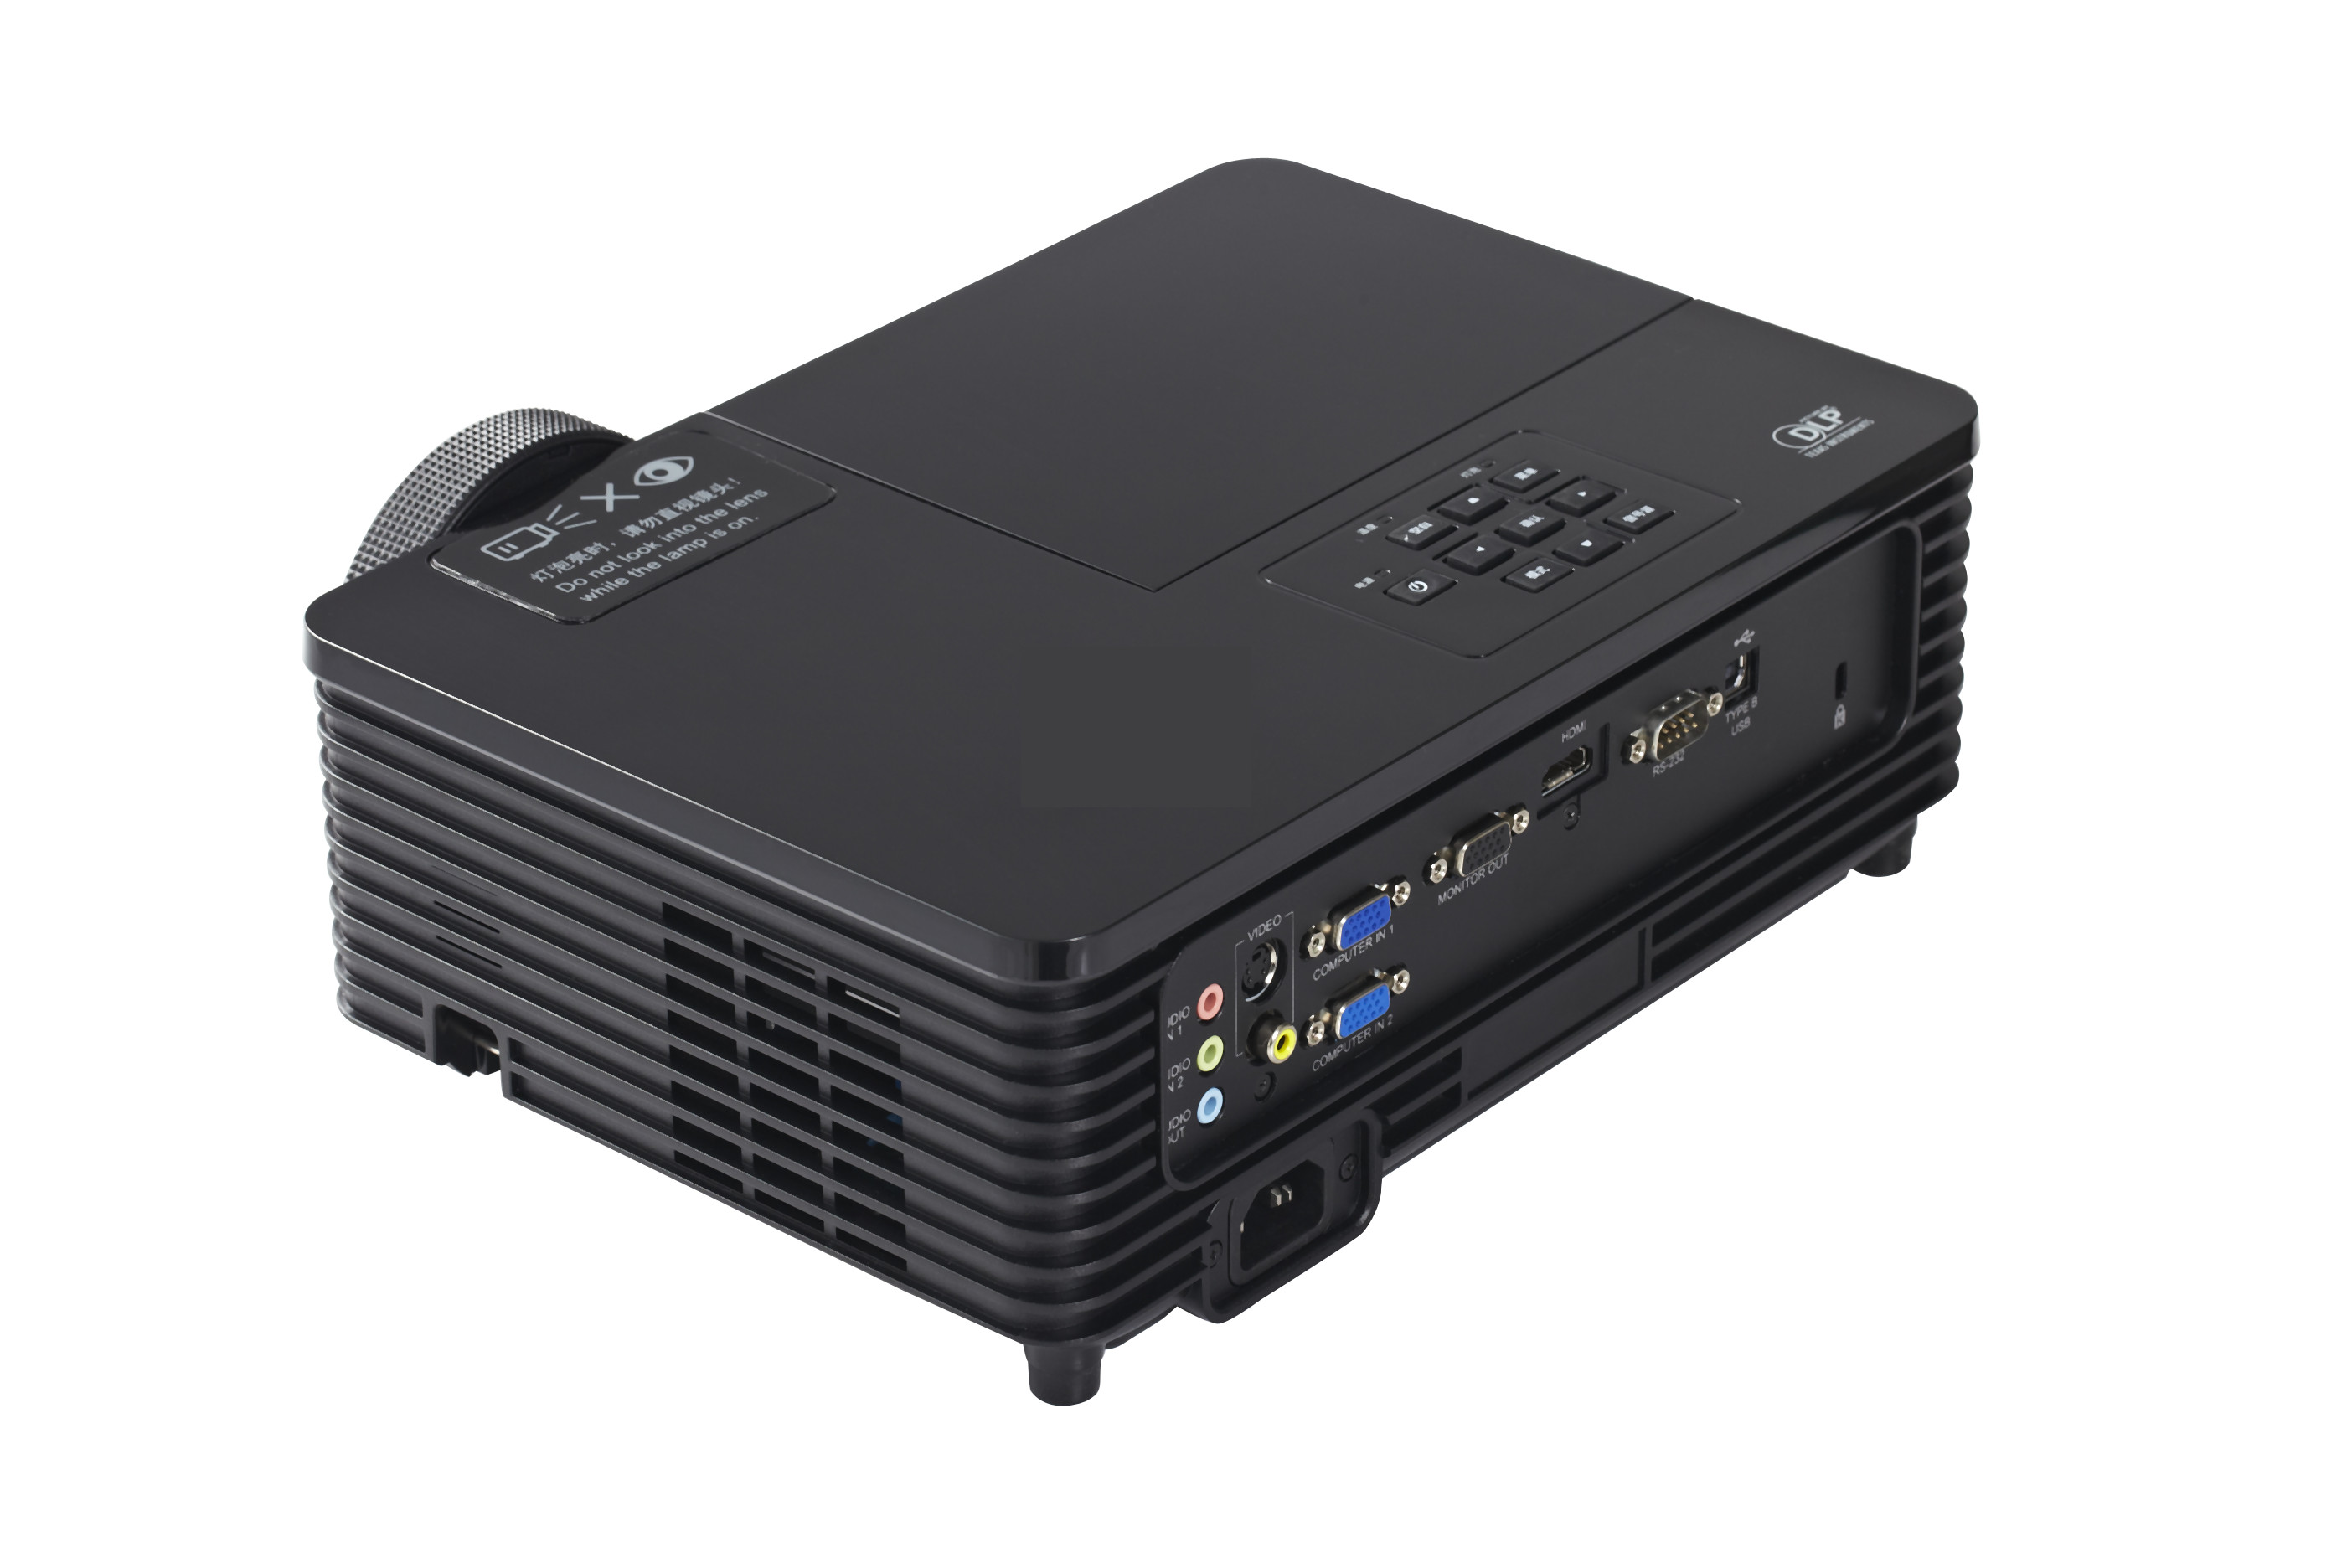 China Short Throw DLP Laser Projector 3200lms For Education for sale